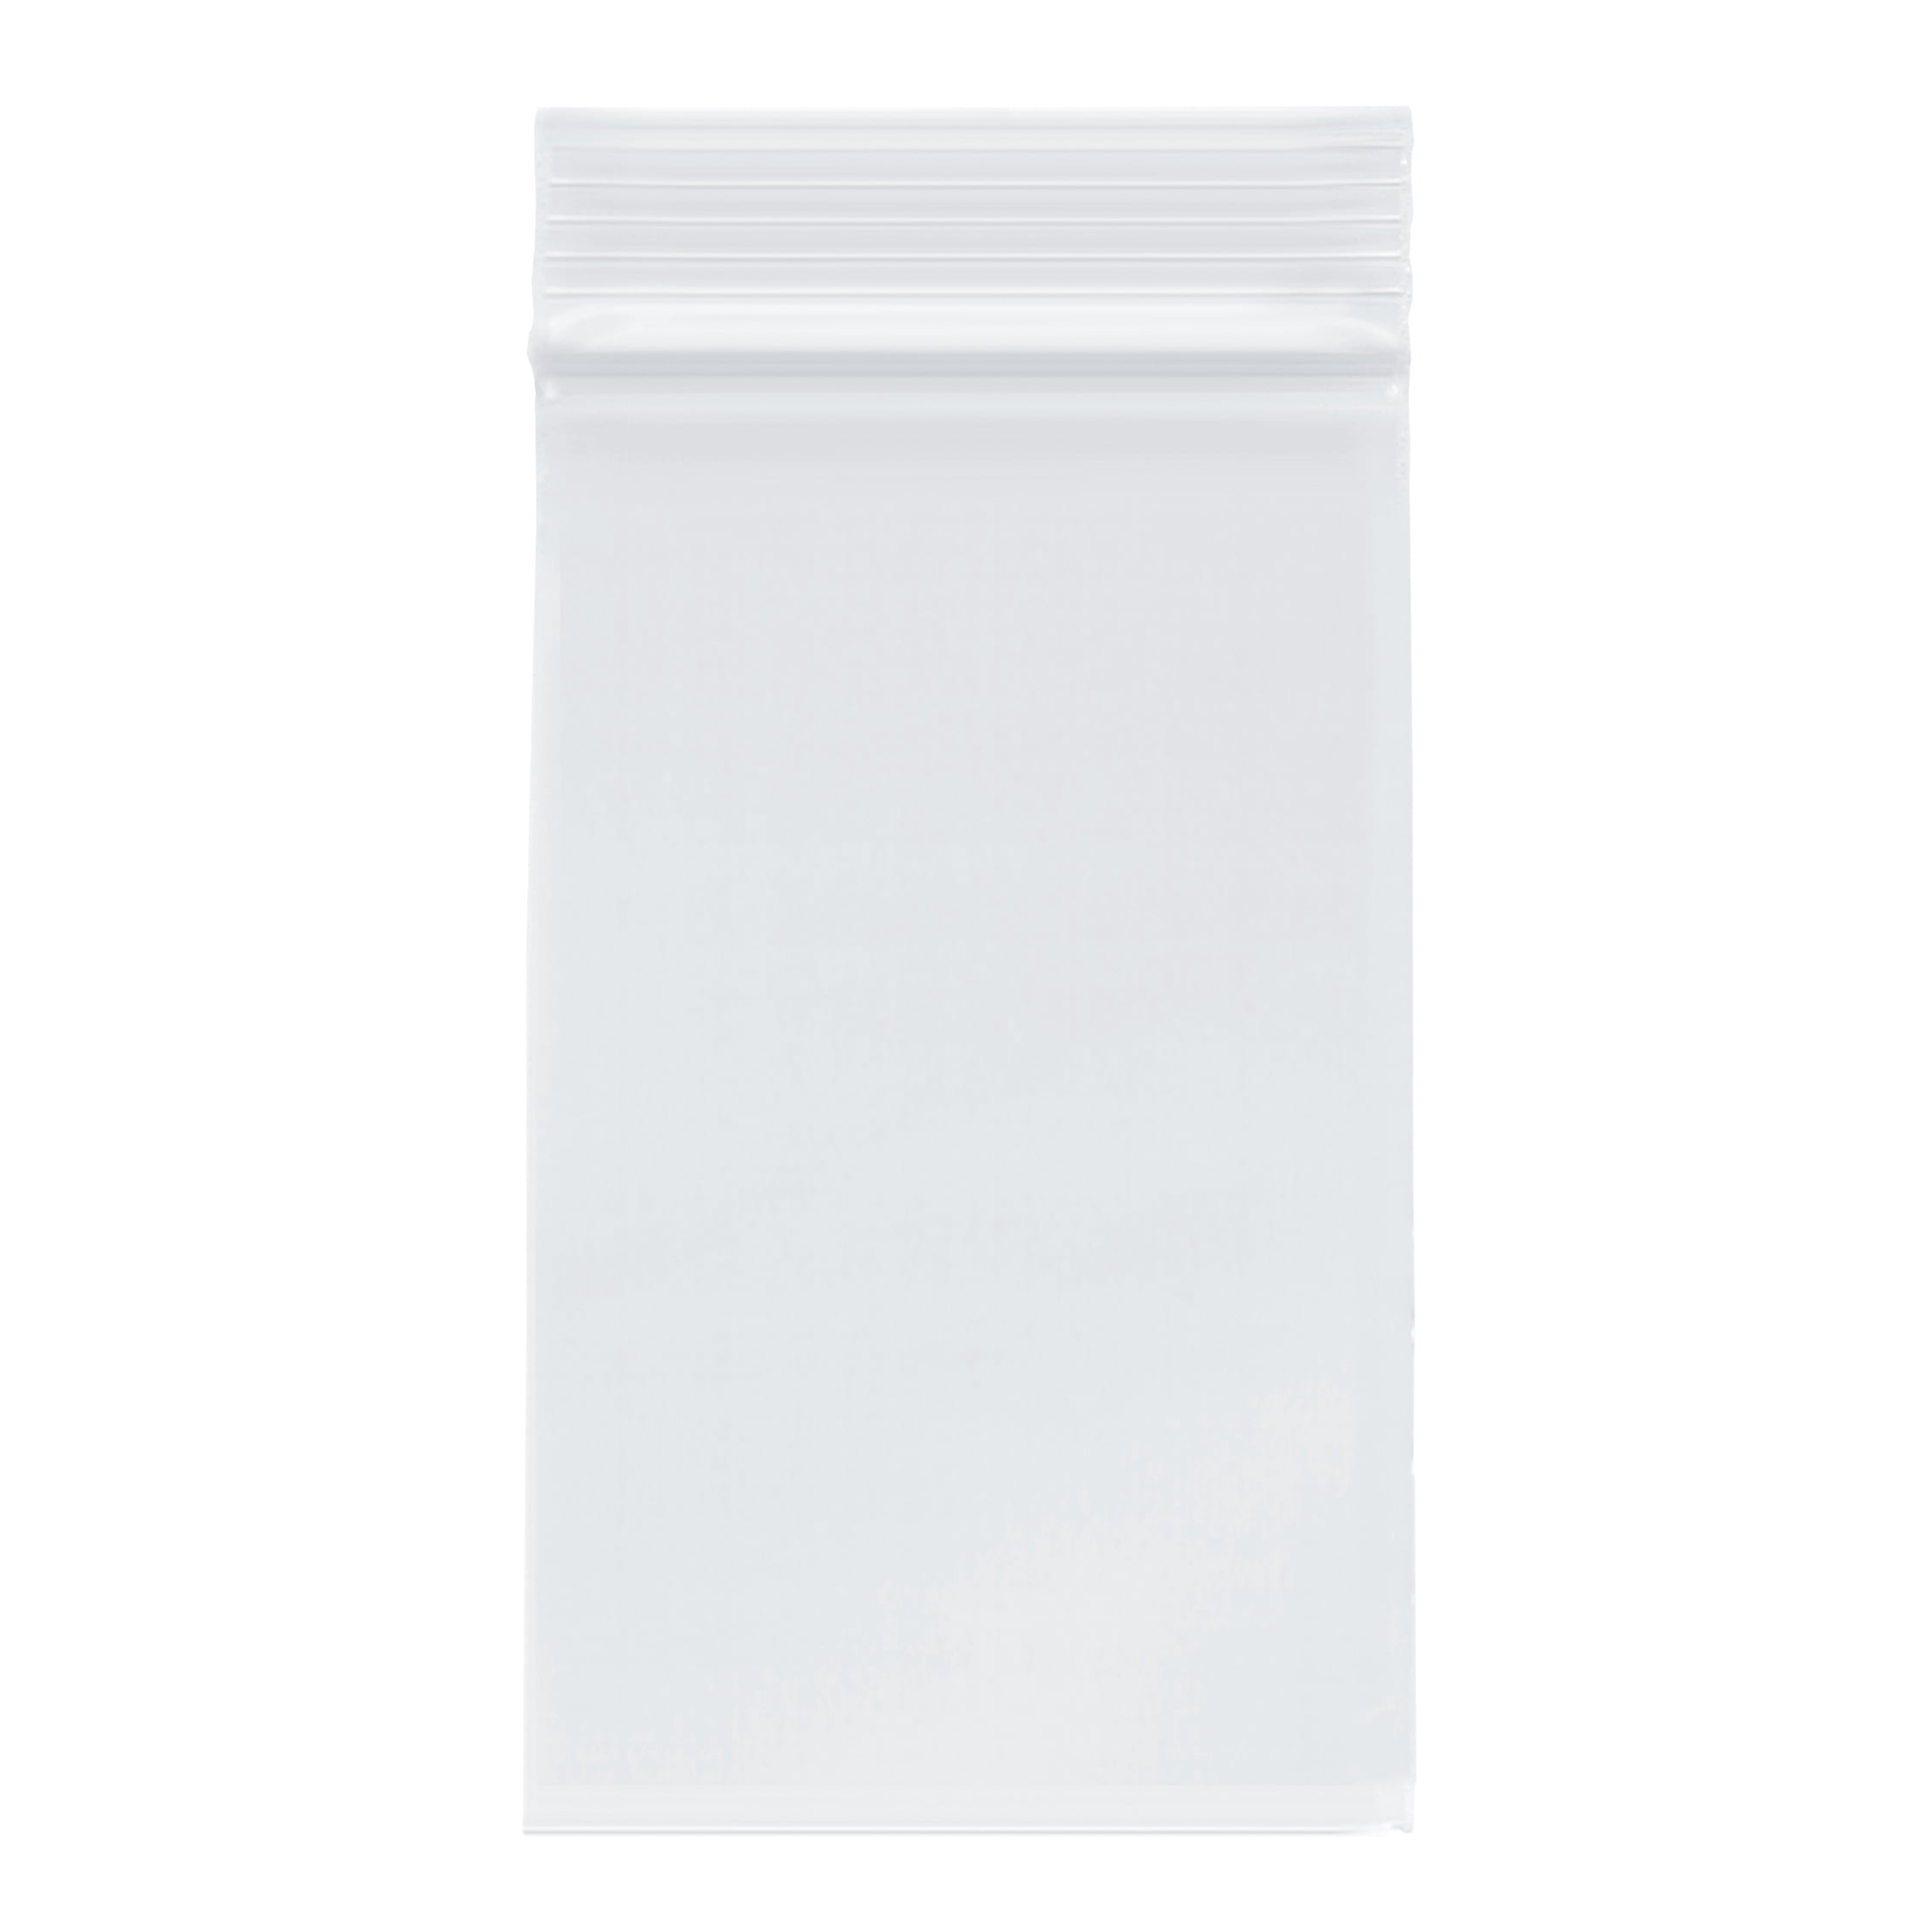 500 Grip Seal Clear Resealable Poly Bags 3" x 3.25" 